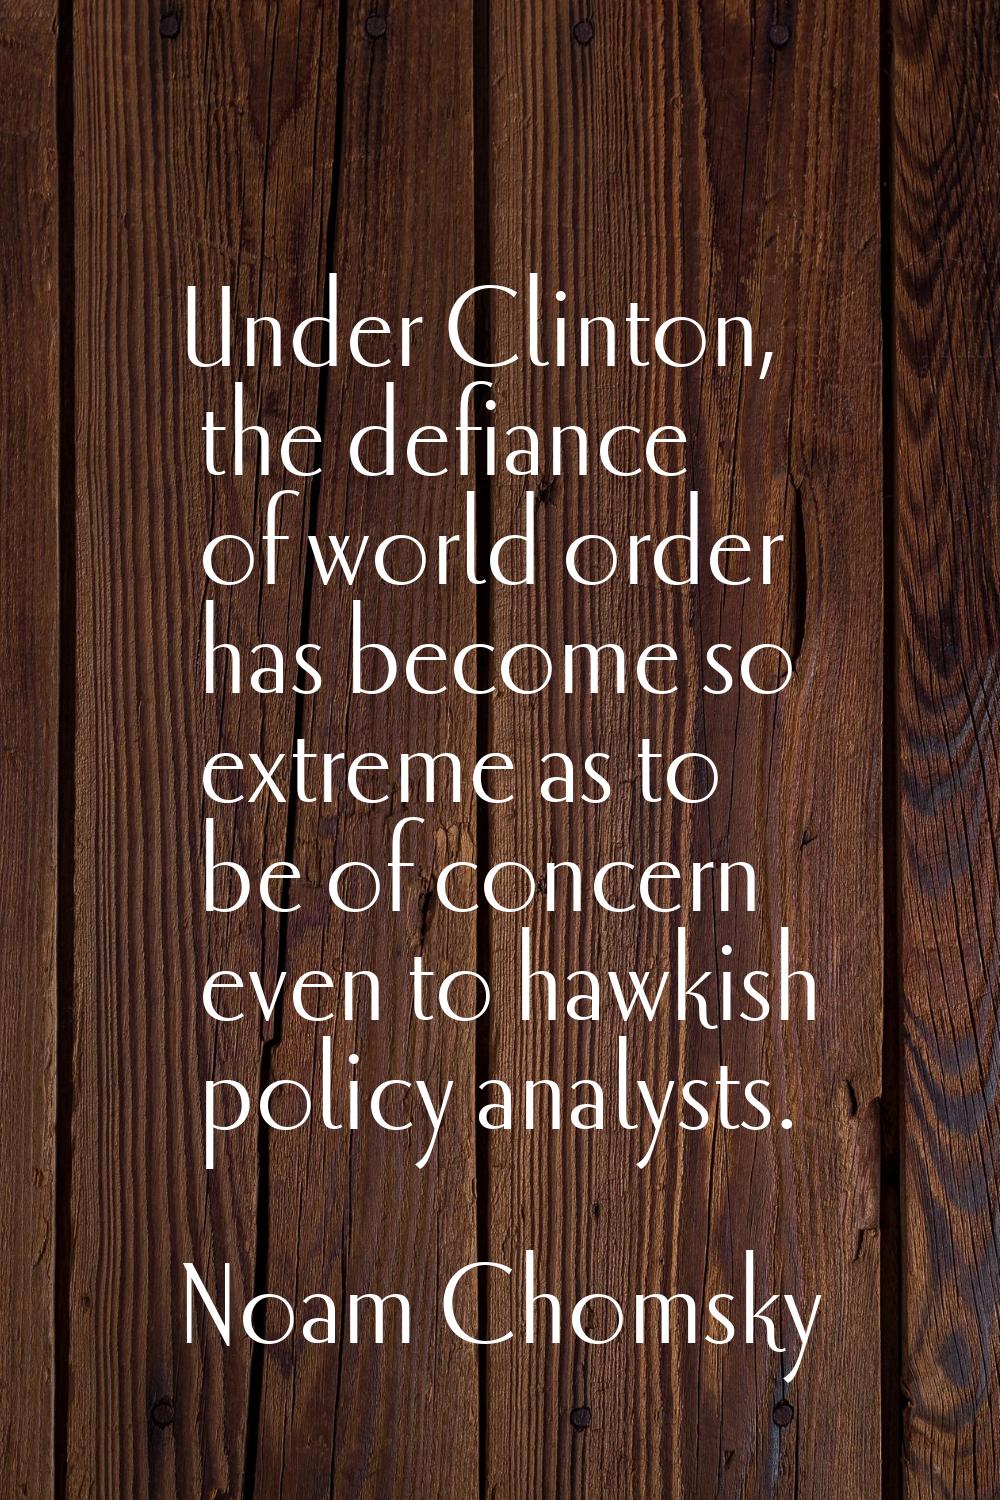 Under Clinton, the defiance of world order has become so extreme as to be of concern even to hawkis